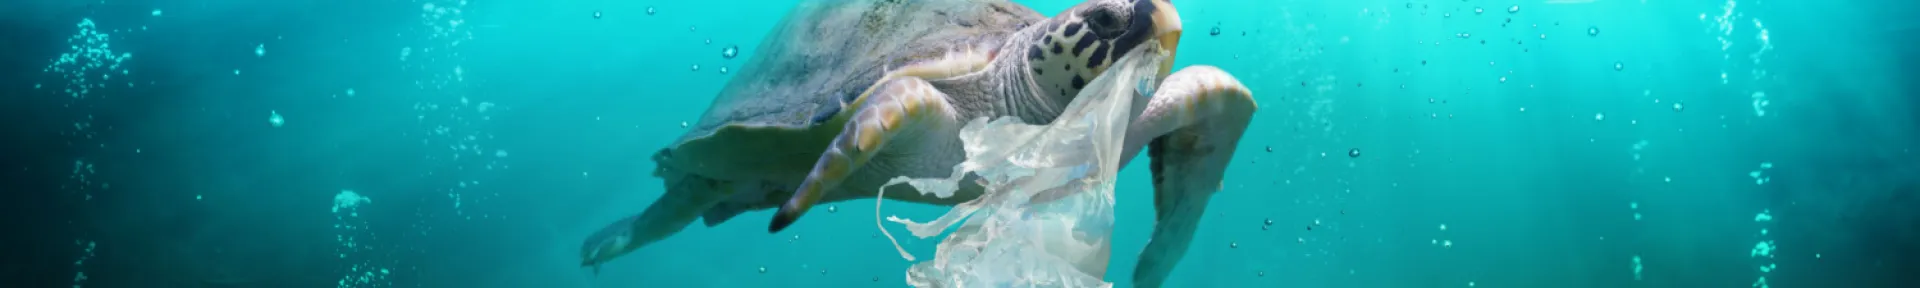 Marine turtle in an ocean polluted by litter